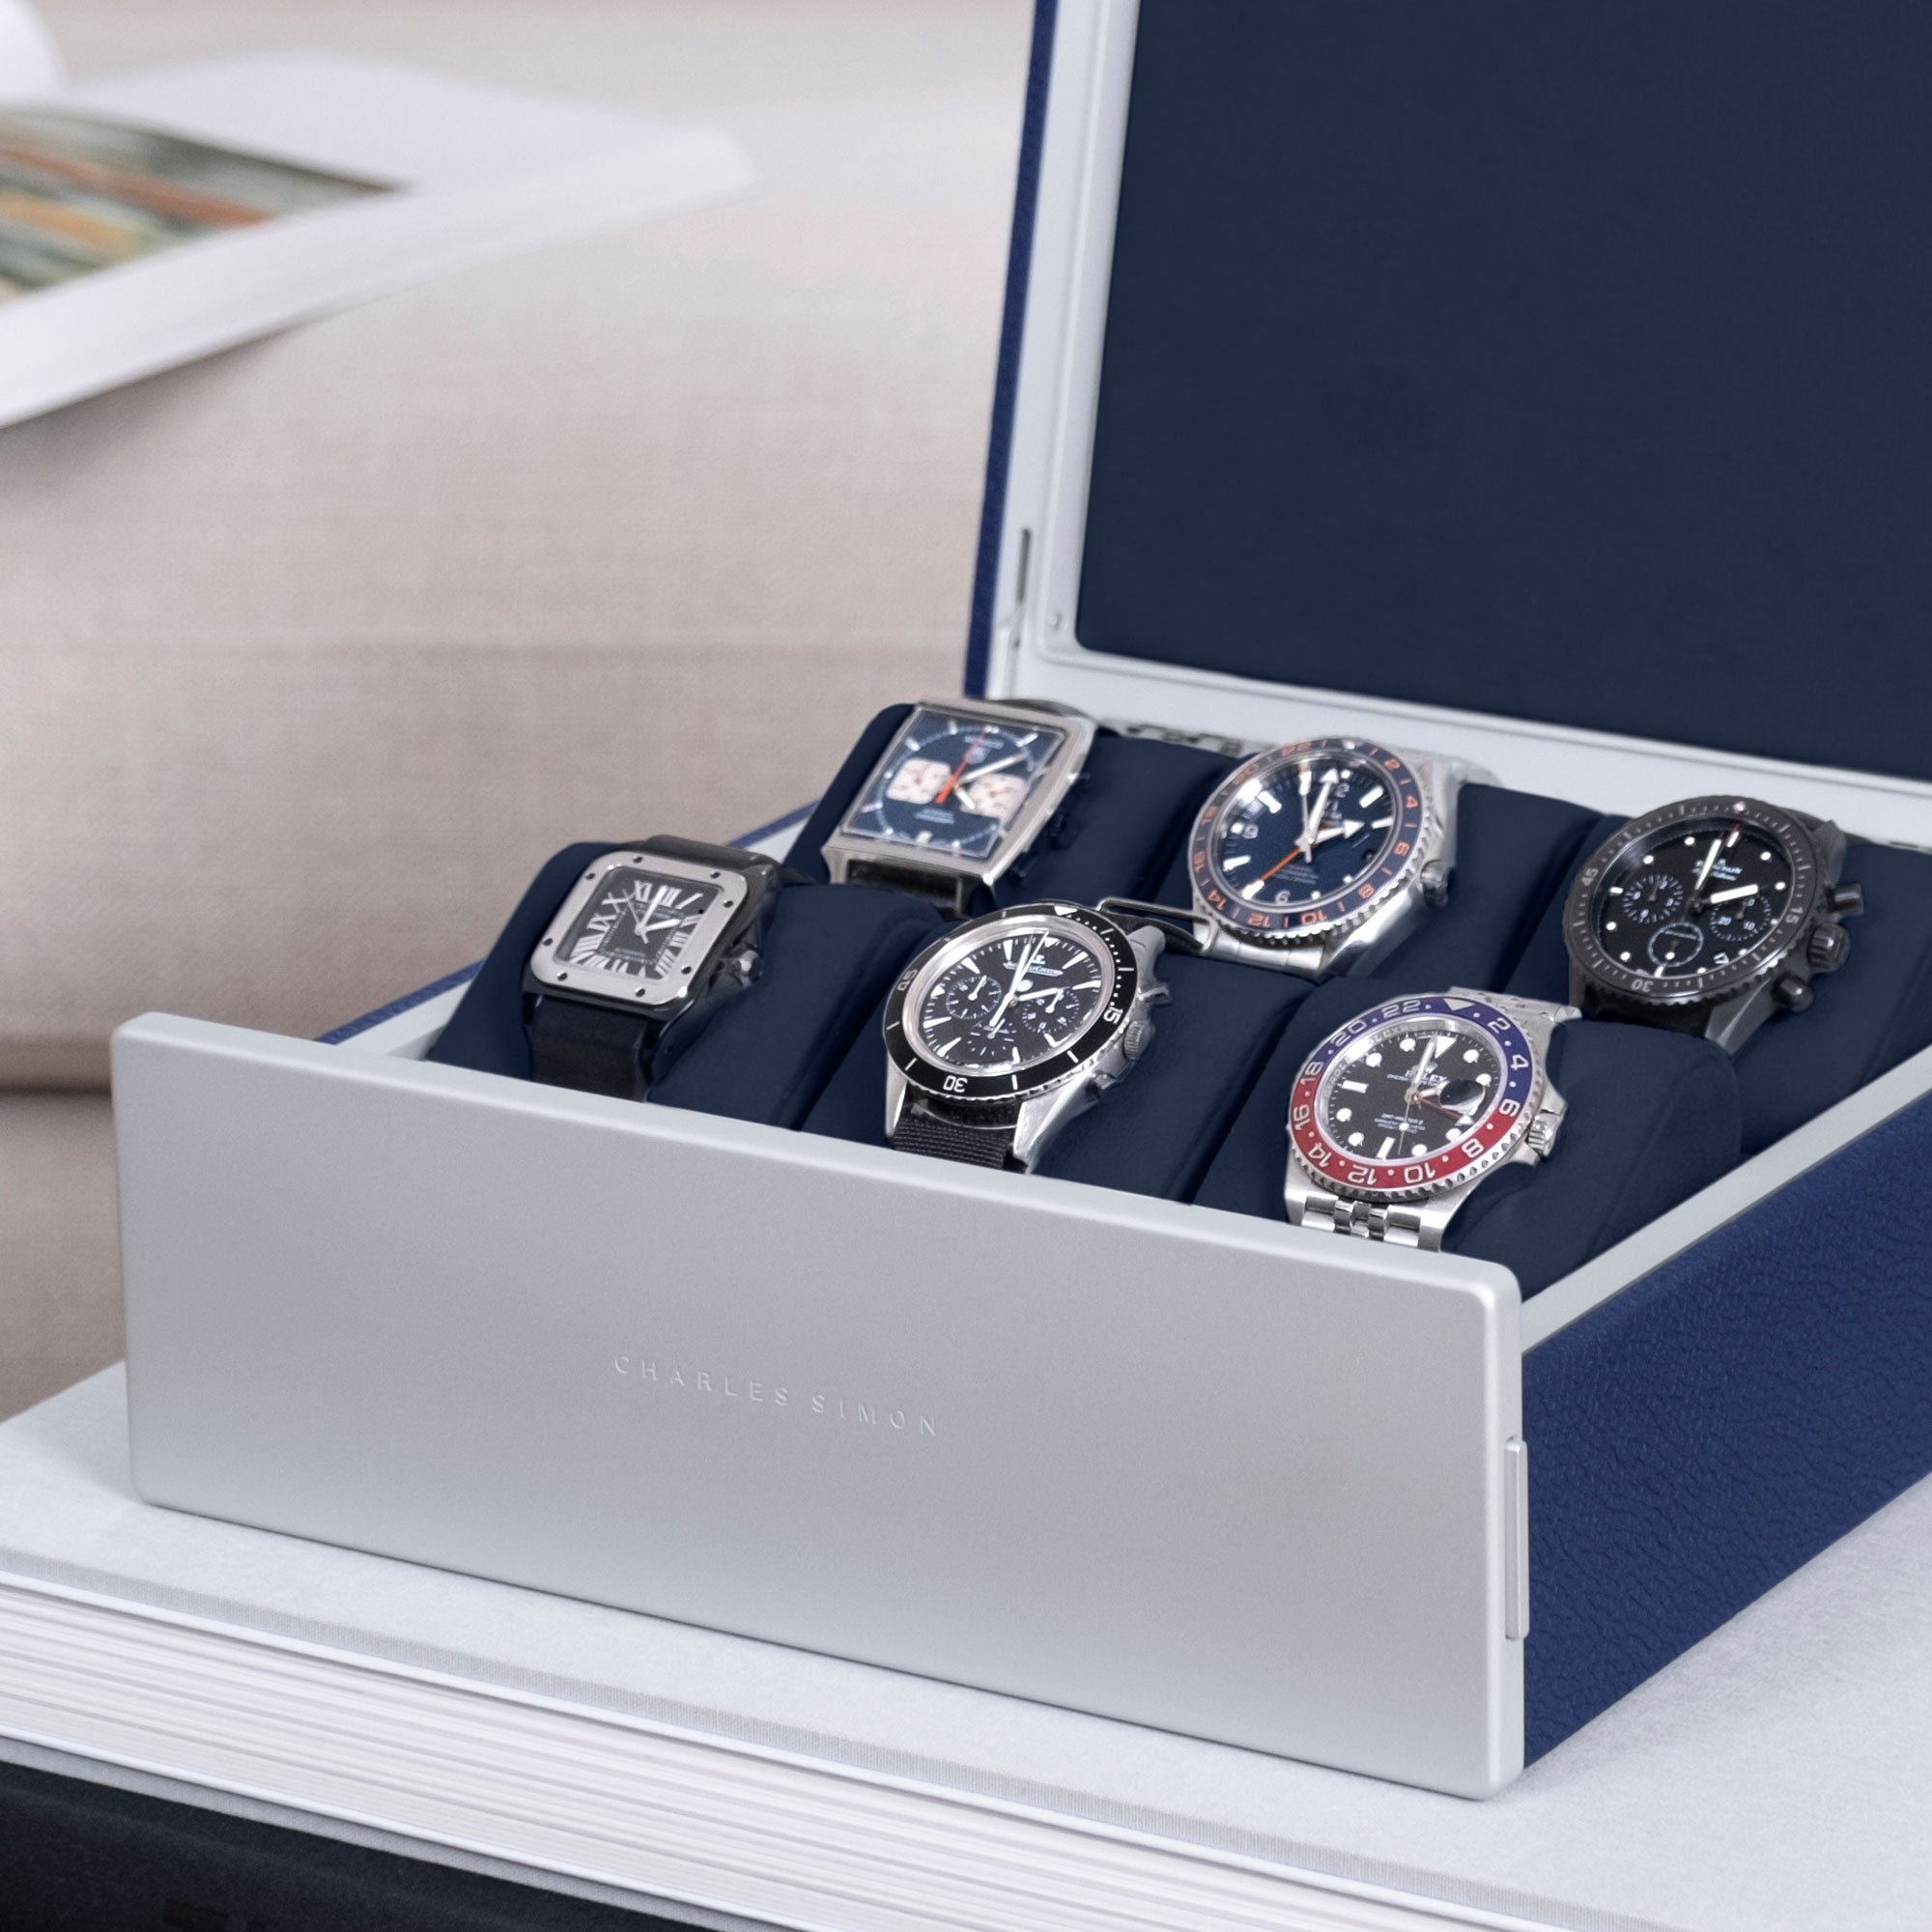 Detail photo of watch collection of six watches, including Cartier, Rolex, Tagheuer, Omega and Jaeger LeCoultre displayed in Spence Watch box in sapphire leather